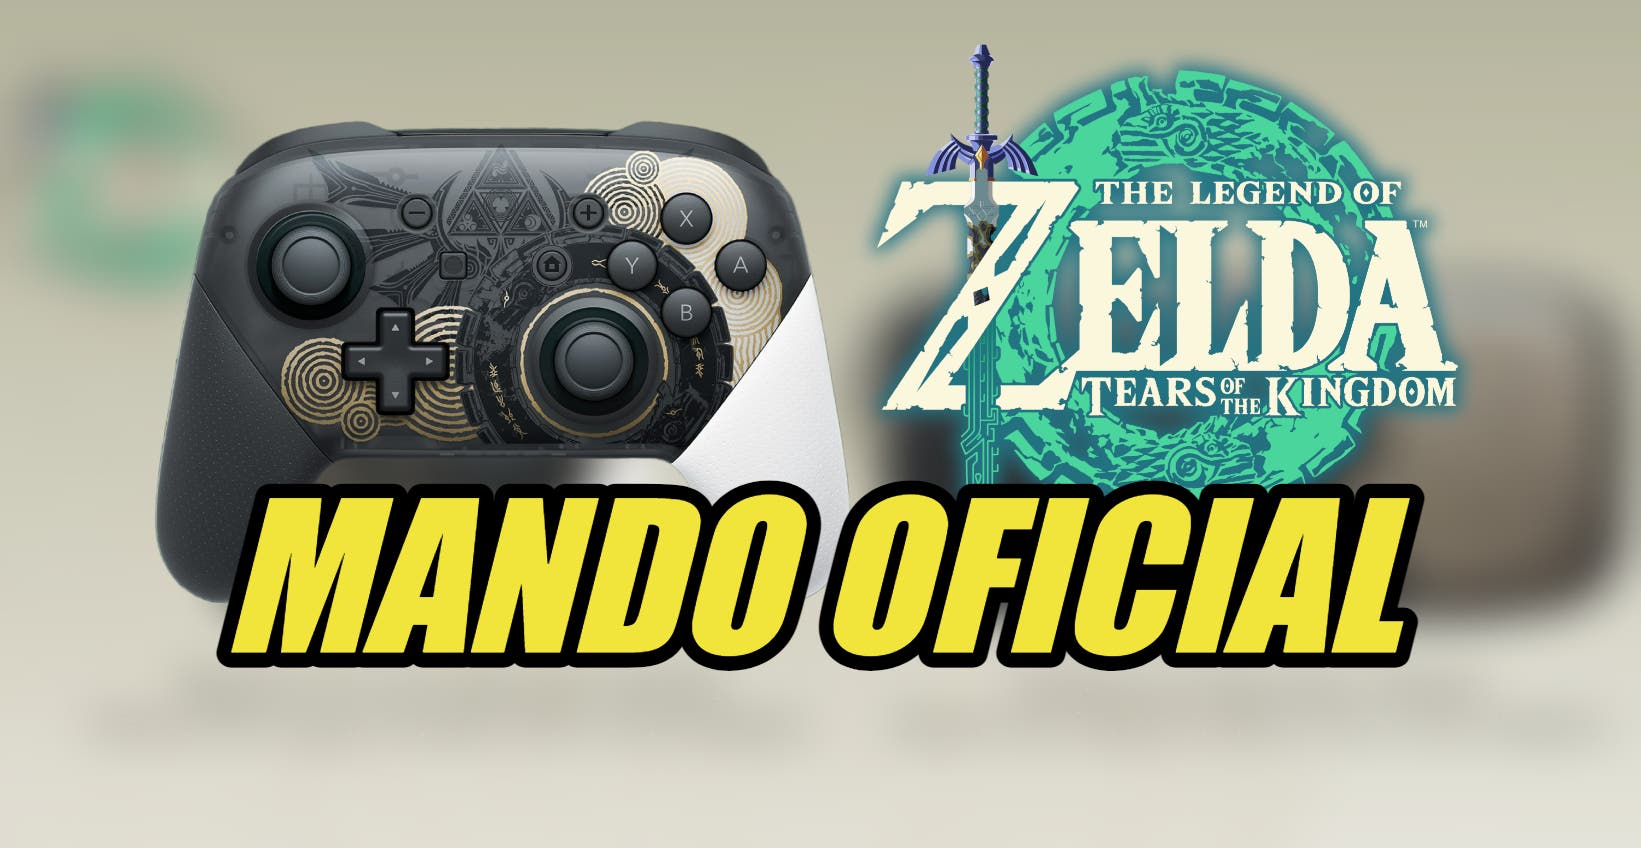 Nintendo Announces Zelda: Tears of the Kingdom Pro Controller and Switch Skin, and They Look Gorgeous!